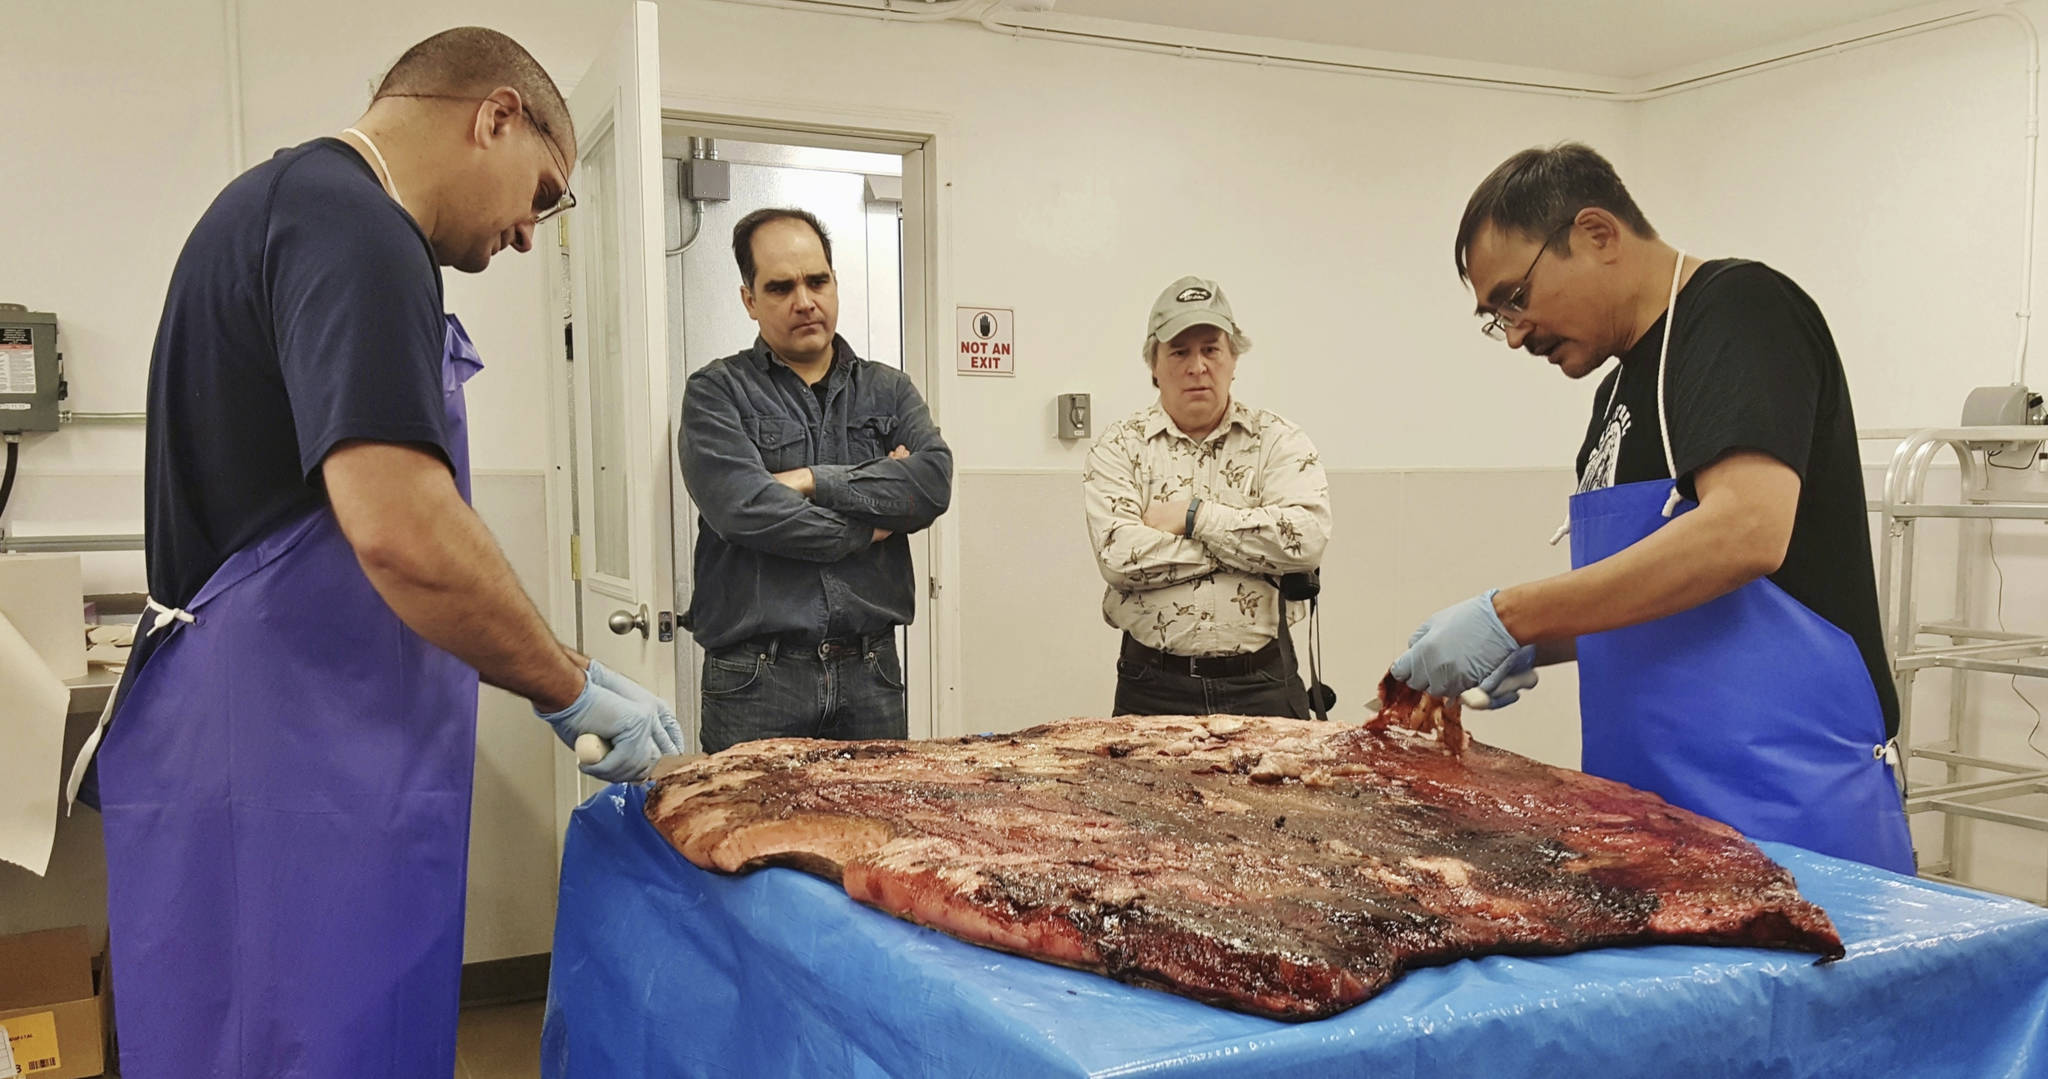 Maniilaq Association via AP
Alex Whiting, left, and Cyrus Harris, right, are observed by Chris Sannito, second from left, and Brian Himelbloom, third from left, of the Kodiak Seafood and Marine Science Center as they trim and clean seal blubber in Kotzebue.